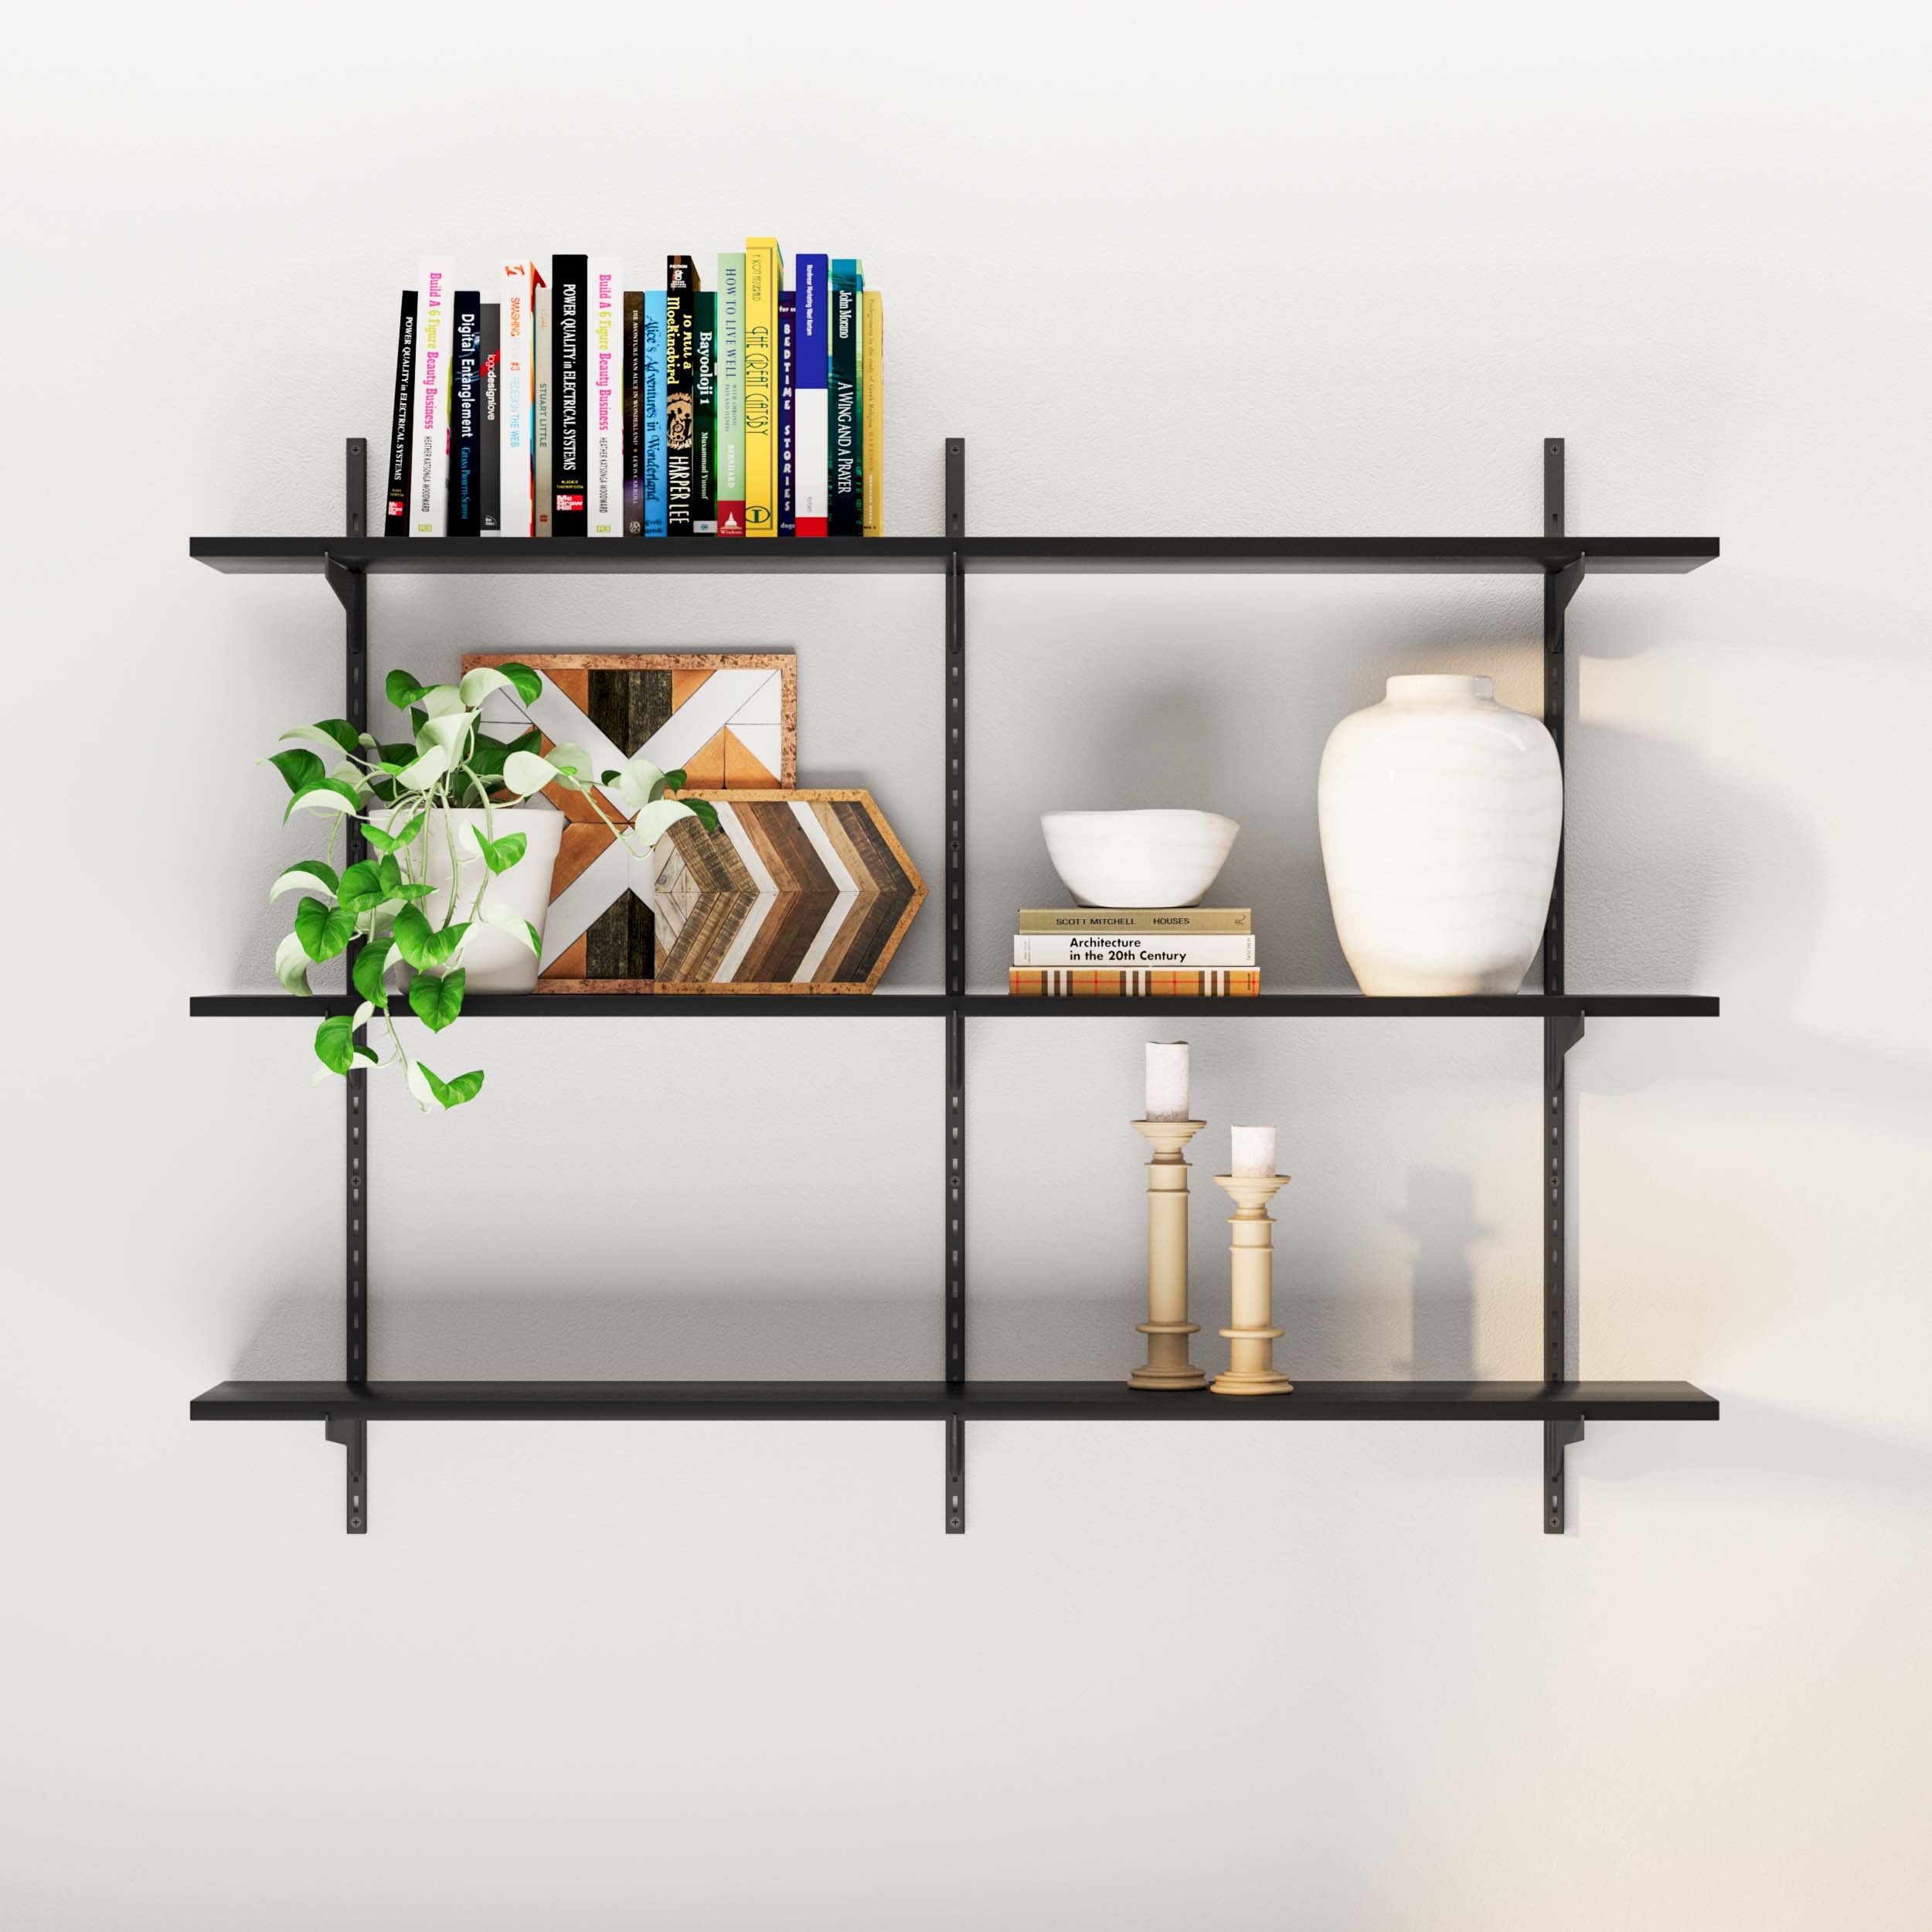 Display shelves black with books, frames, plant, and ceramic décor in a living space.